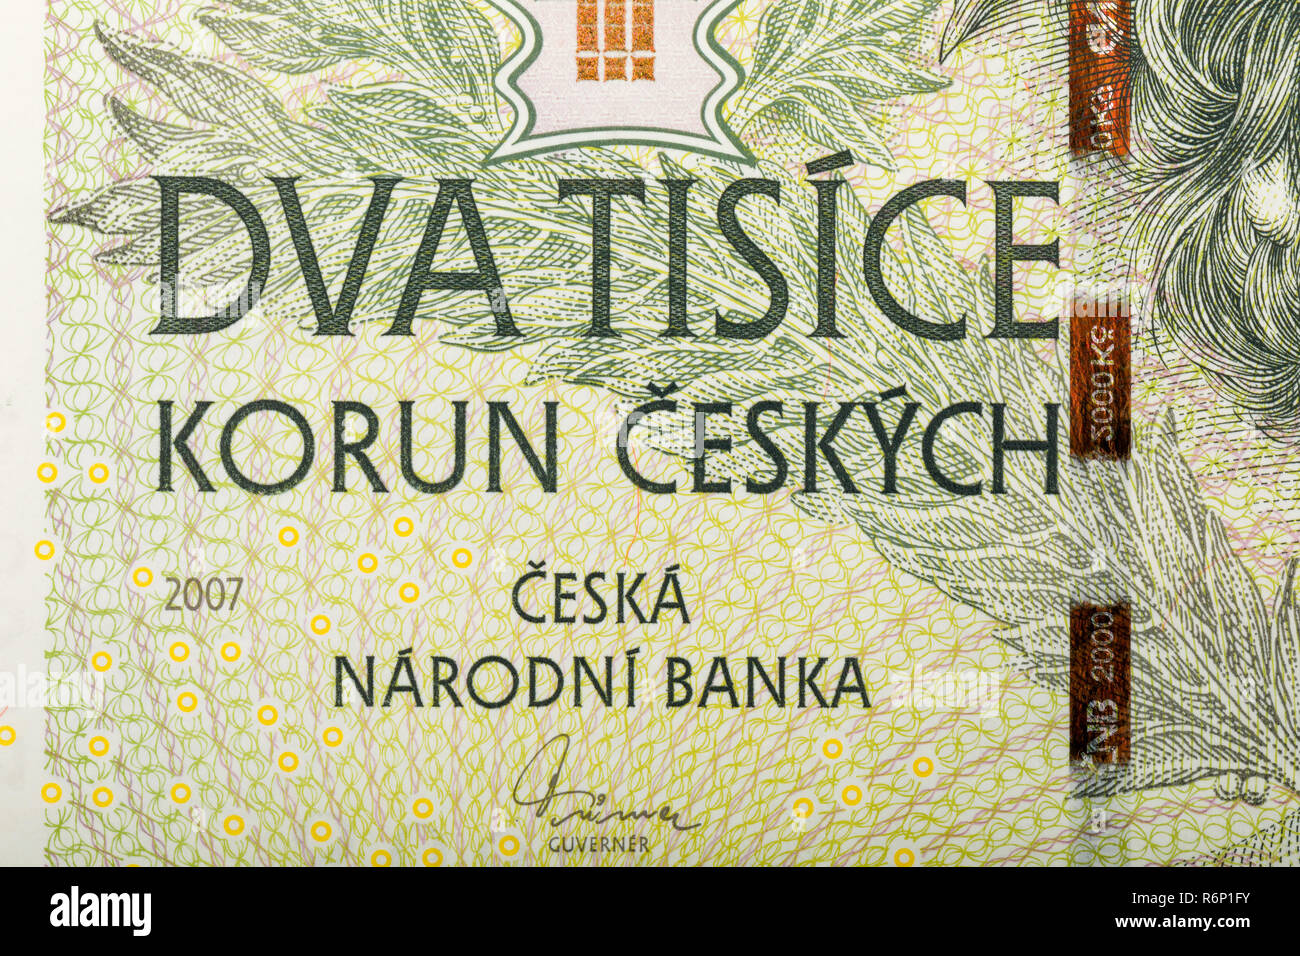 detail of czech banknote Stock Photo